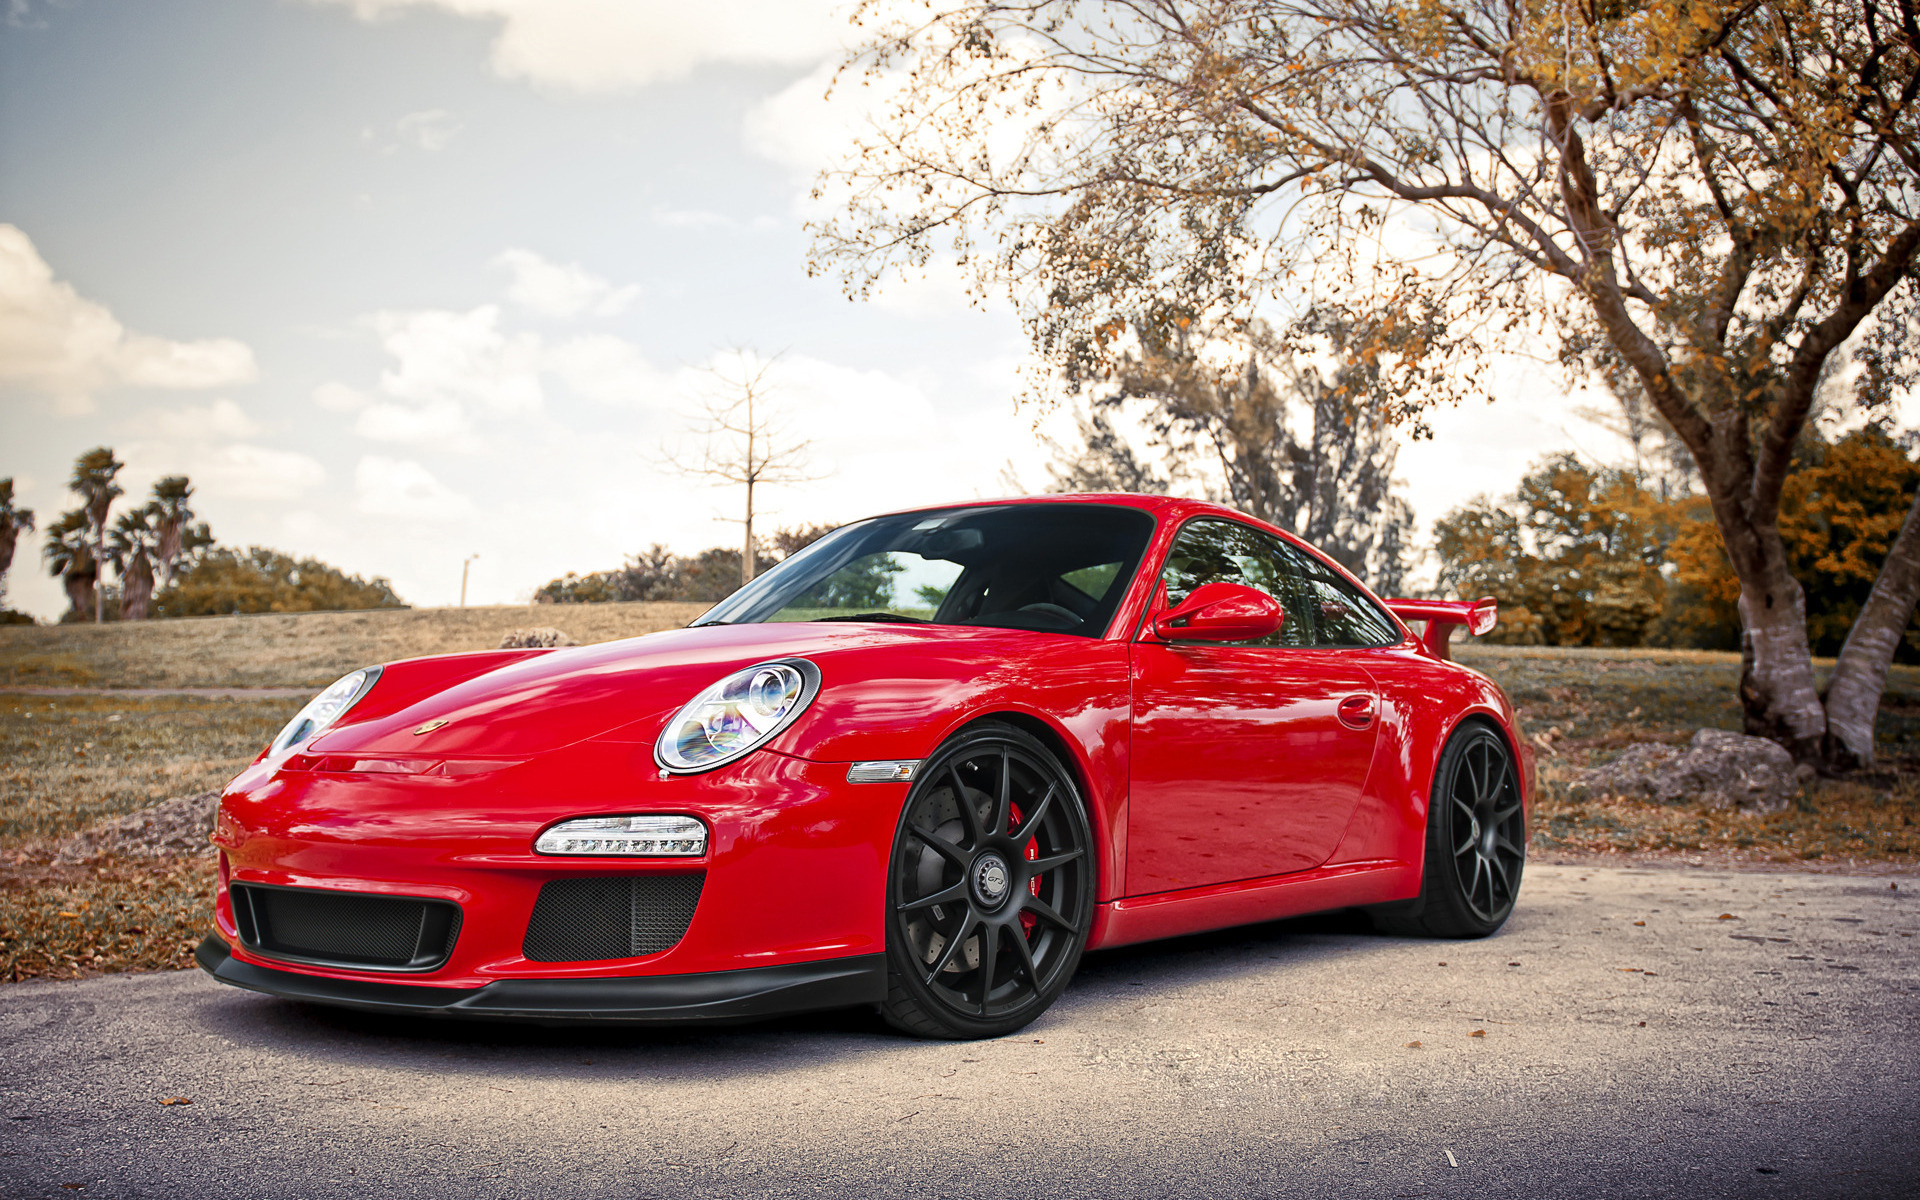 Porsche 997 GT3 wallpapers and images   wallpapers